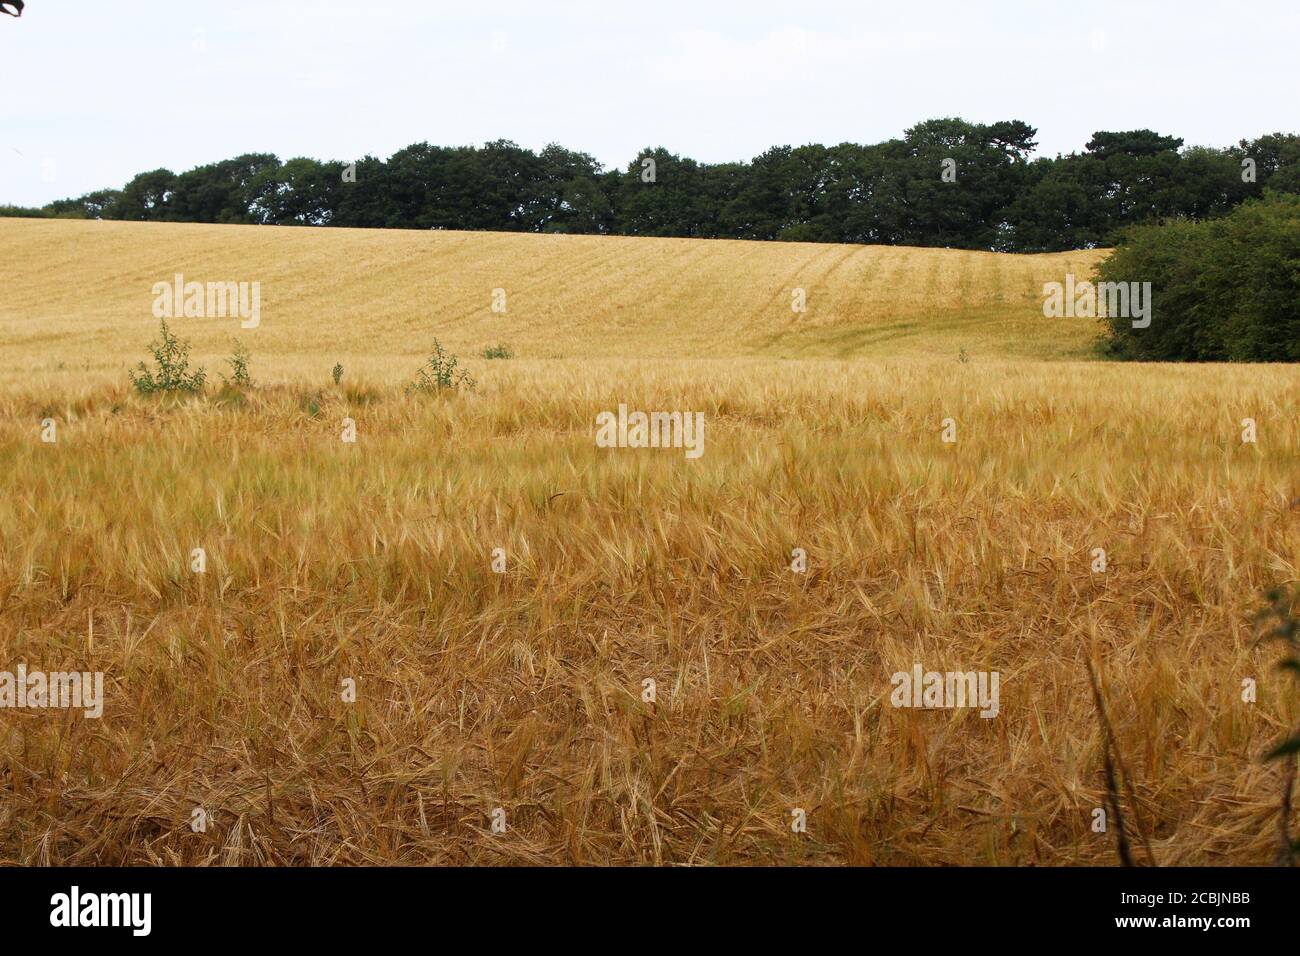 Big field of growing rye (Secale cereale) in Pickmere, England Stock Photo